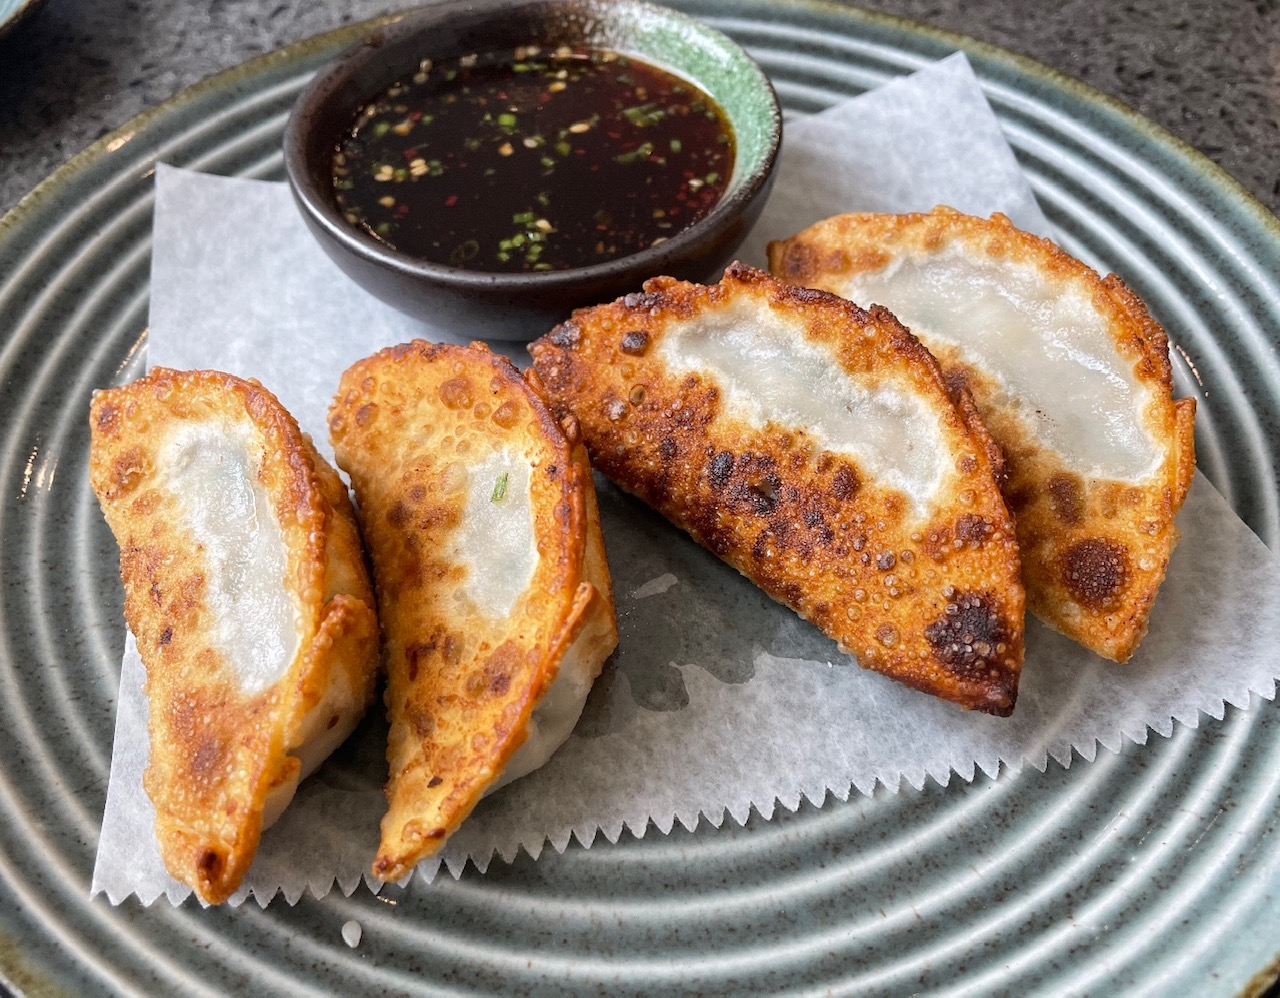 On a circular ceramic plate with white rings, there is a parchment paper with four fried dumplings and a small cup of dipping sauce. Photo by Alyssa Buckley.